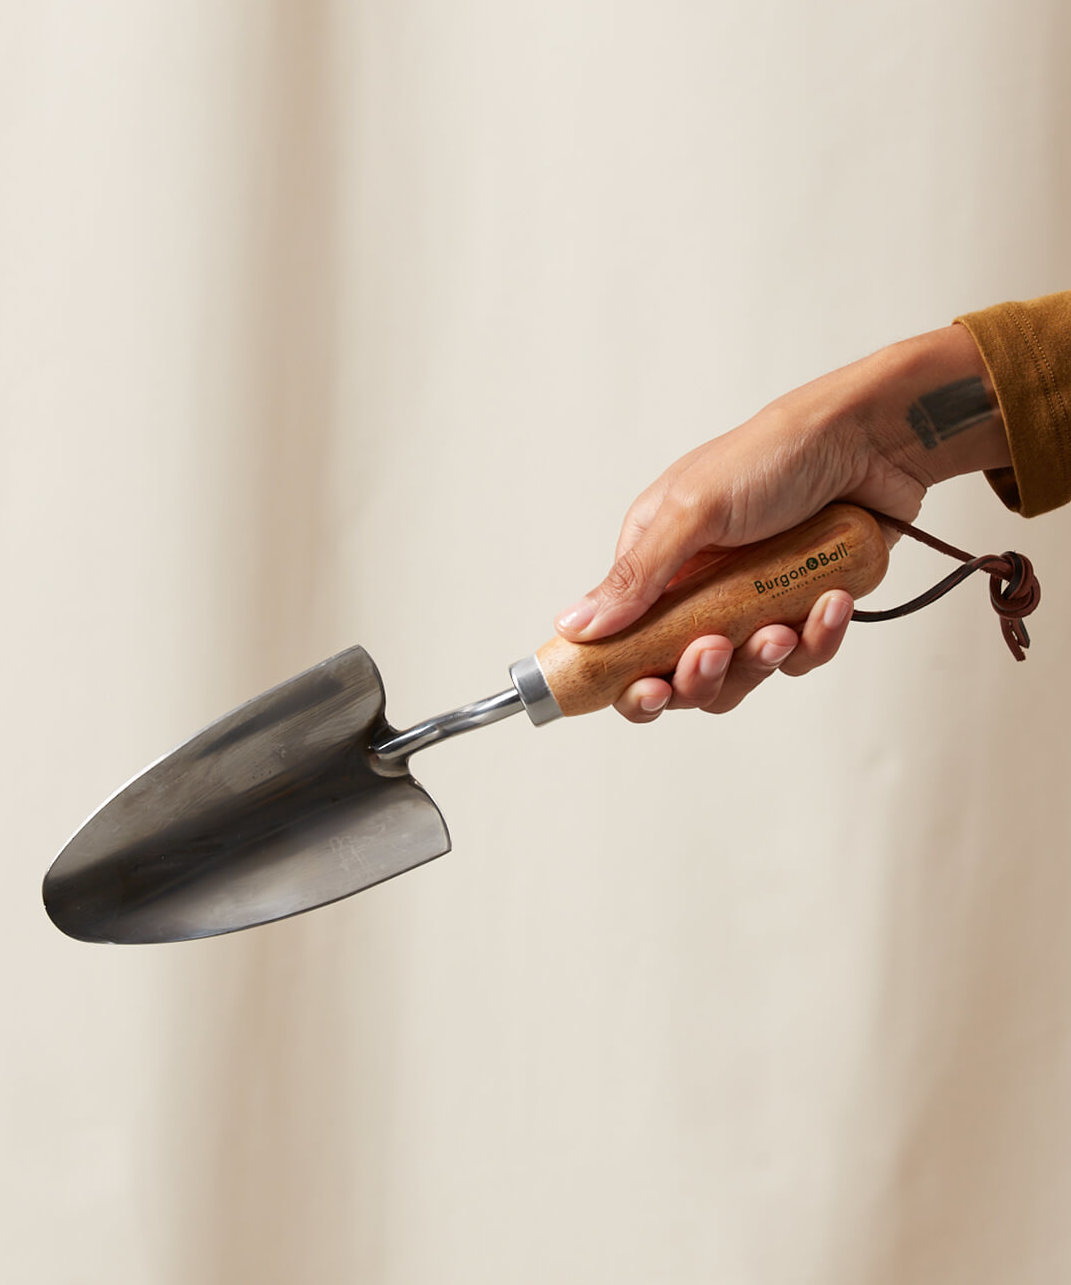 Trowel Trowel: How to Extend the Life of Your Hand Trowel